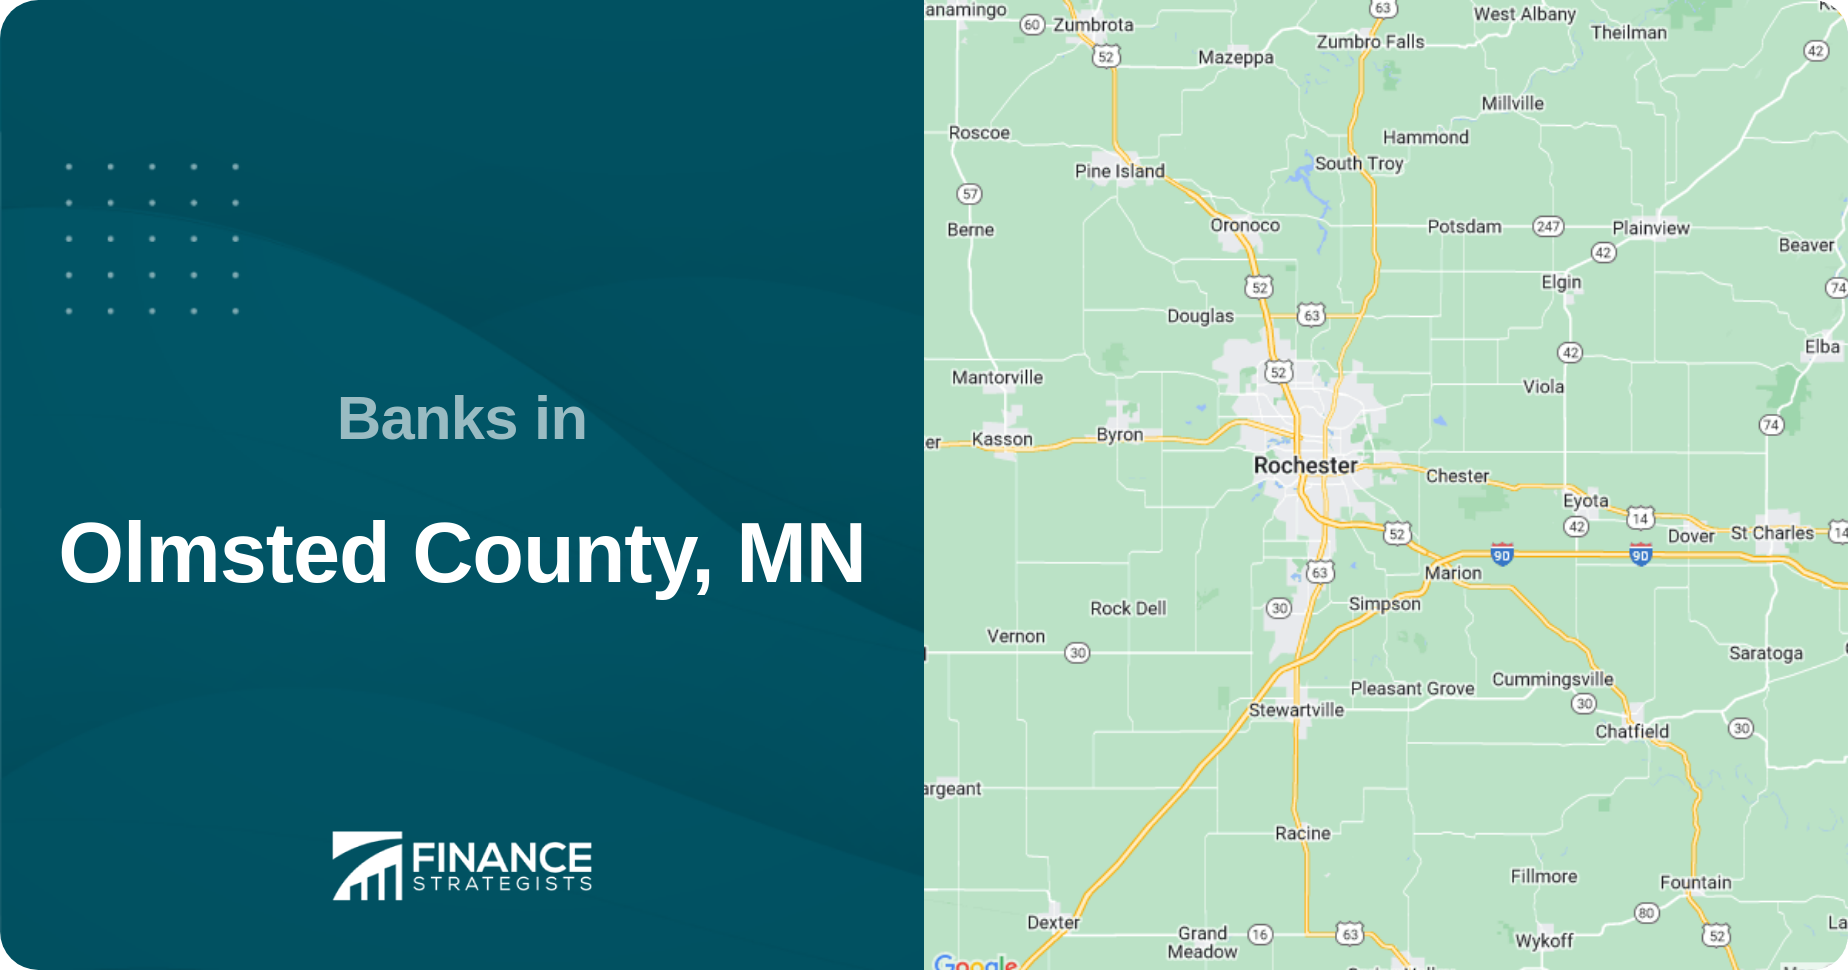 Banks in Olmsted County, MN